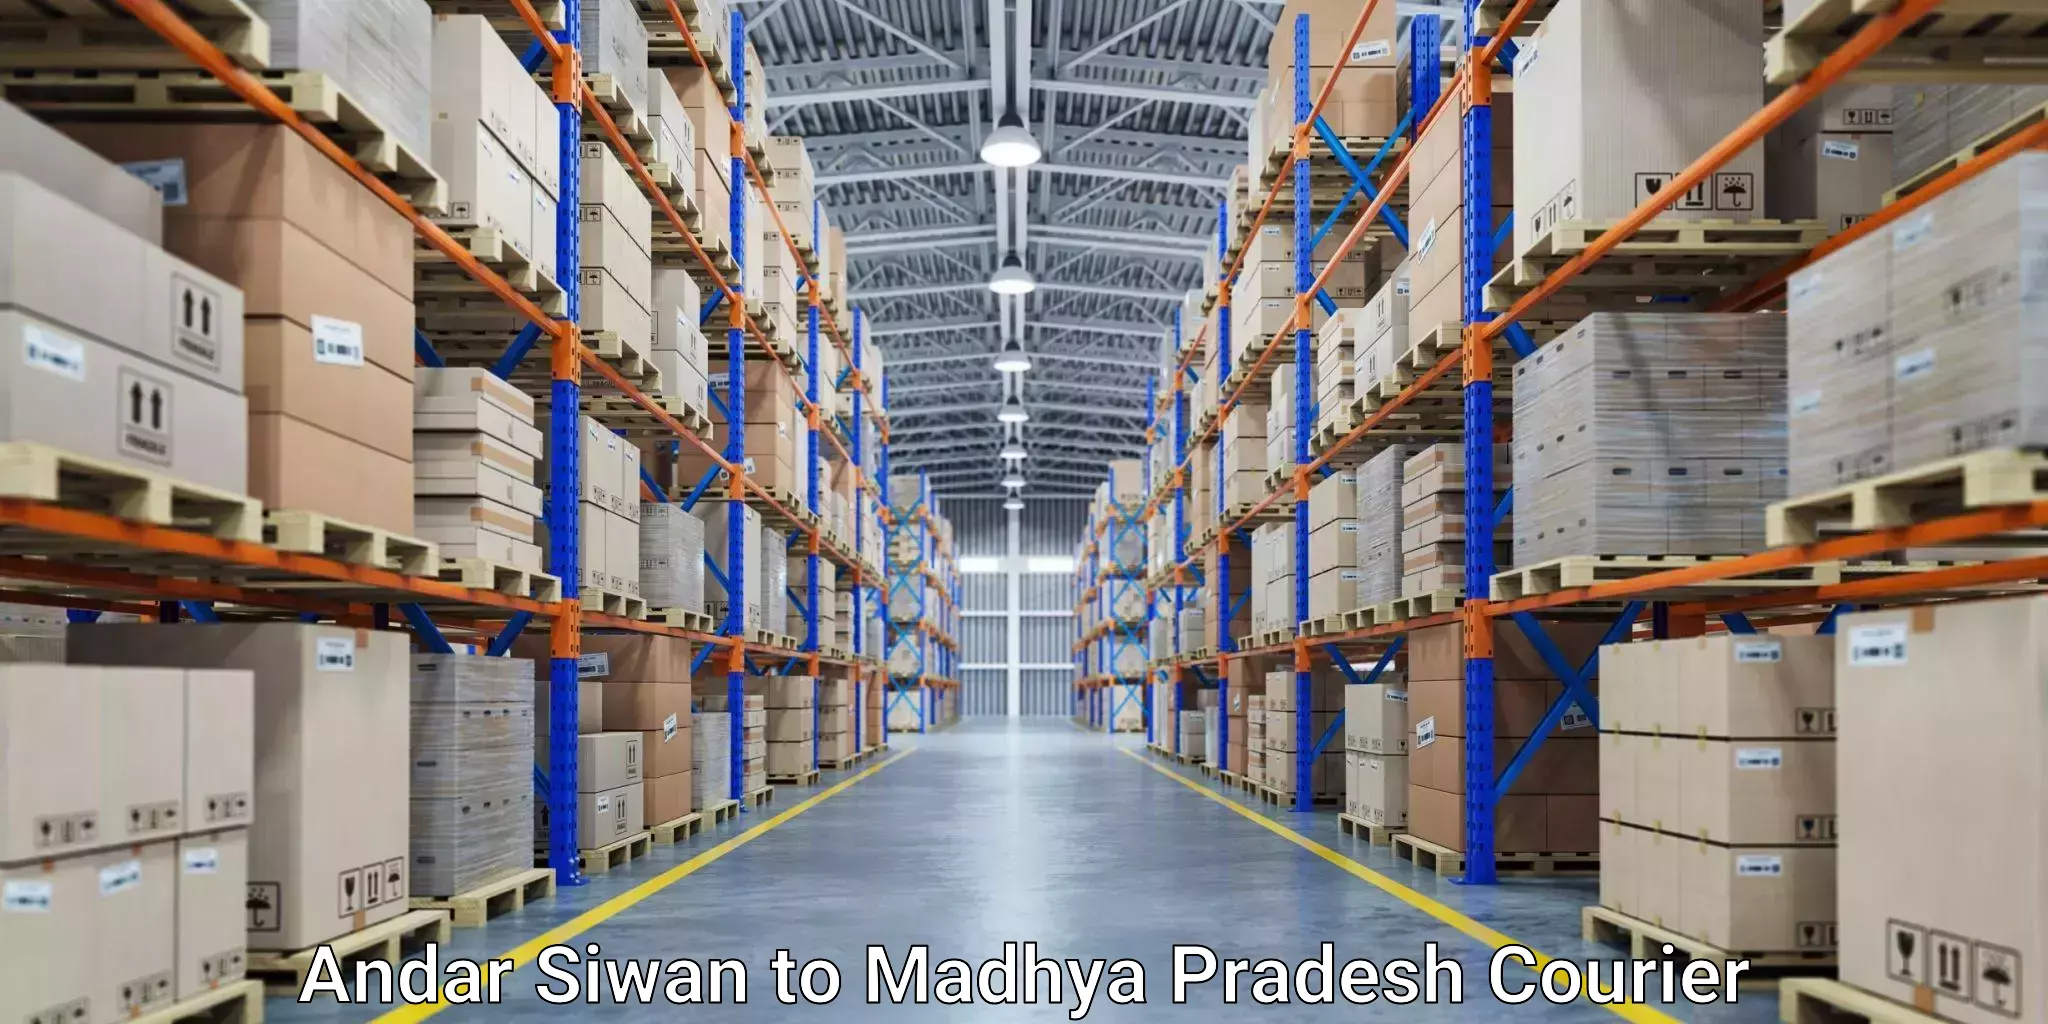 Courier service booking Andar Siwan to Jatara